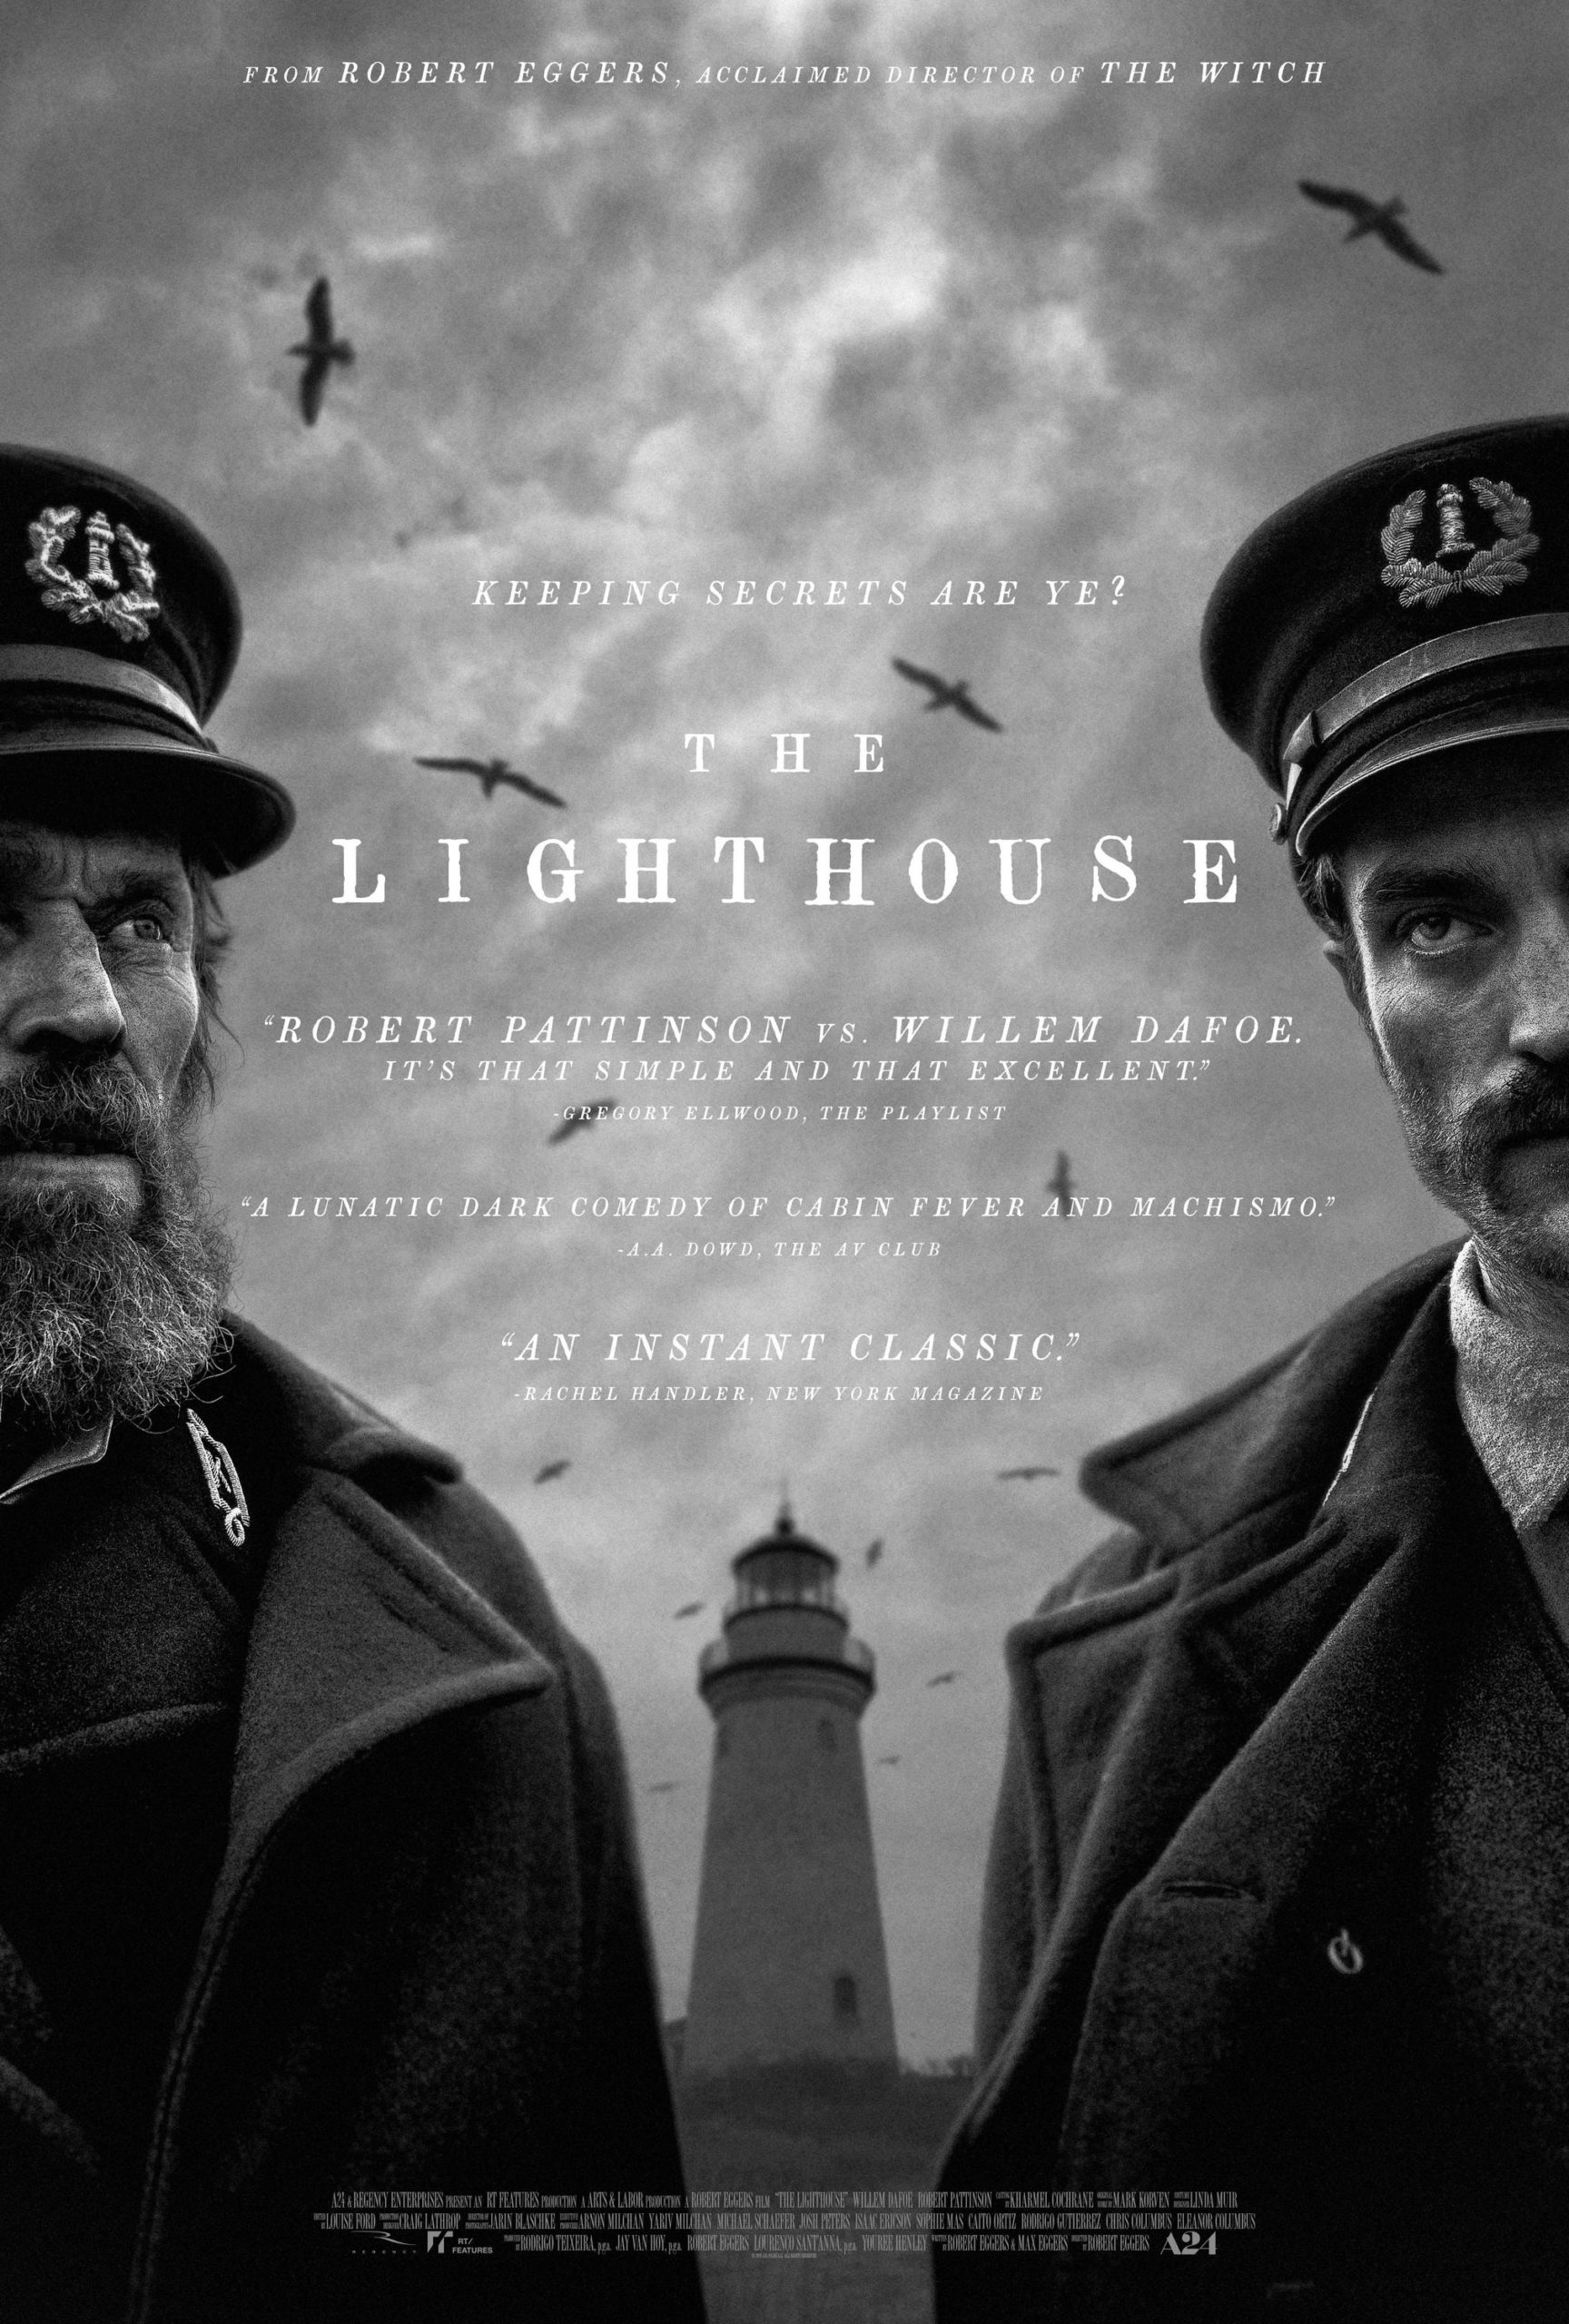 The Lighthouse (2019) ★★★★☆